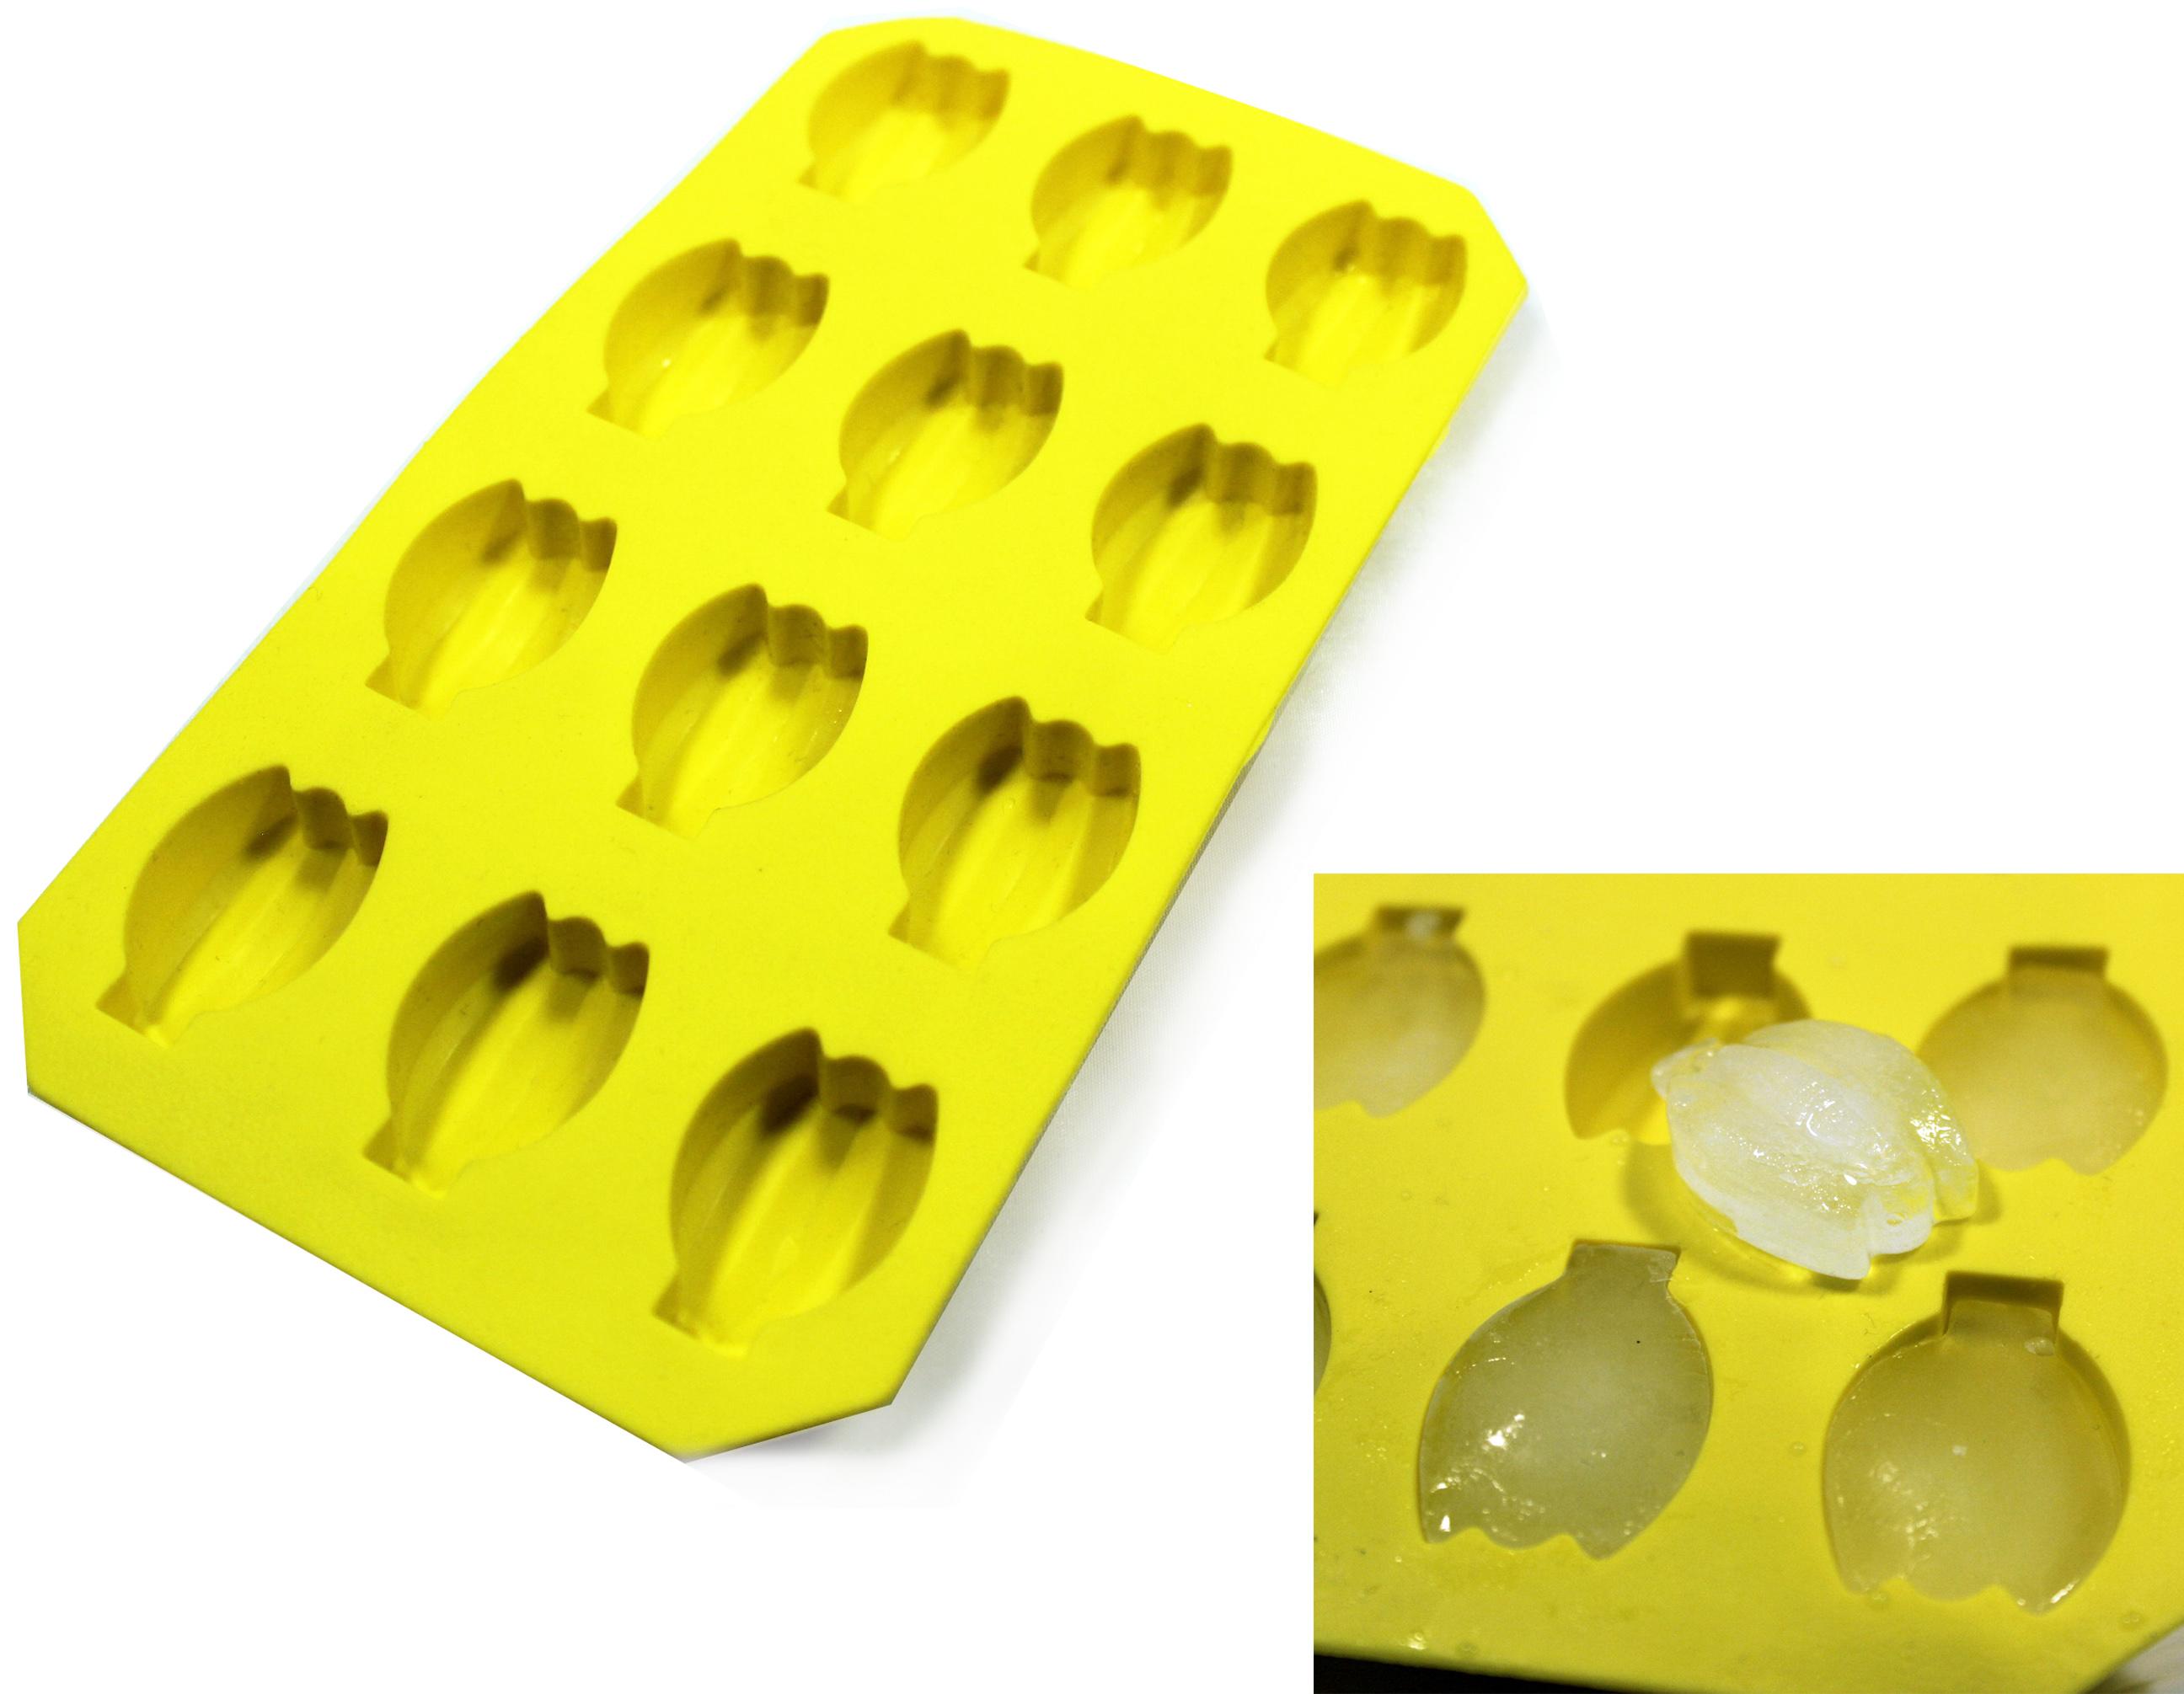 Details about   ICE CUBE TRAY Easy Pop Out Round Fruit Shape Heart Slots Silicone Mould Jelly UK 